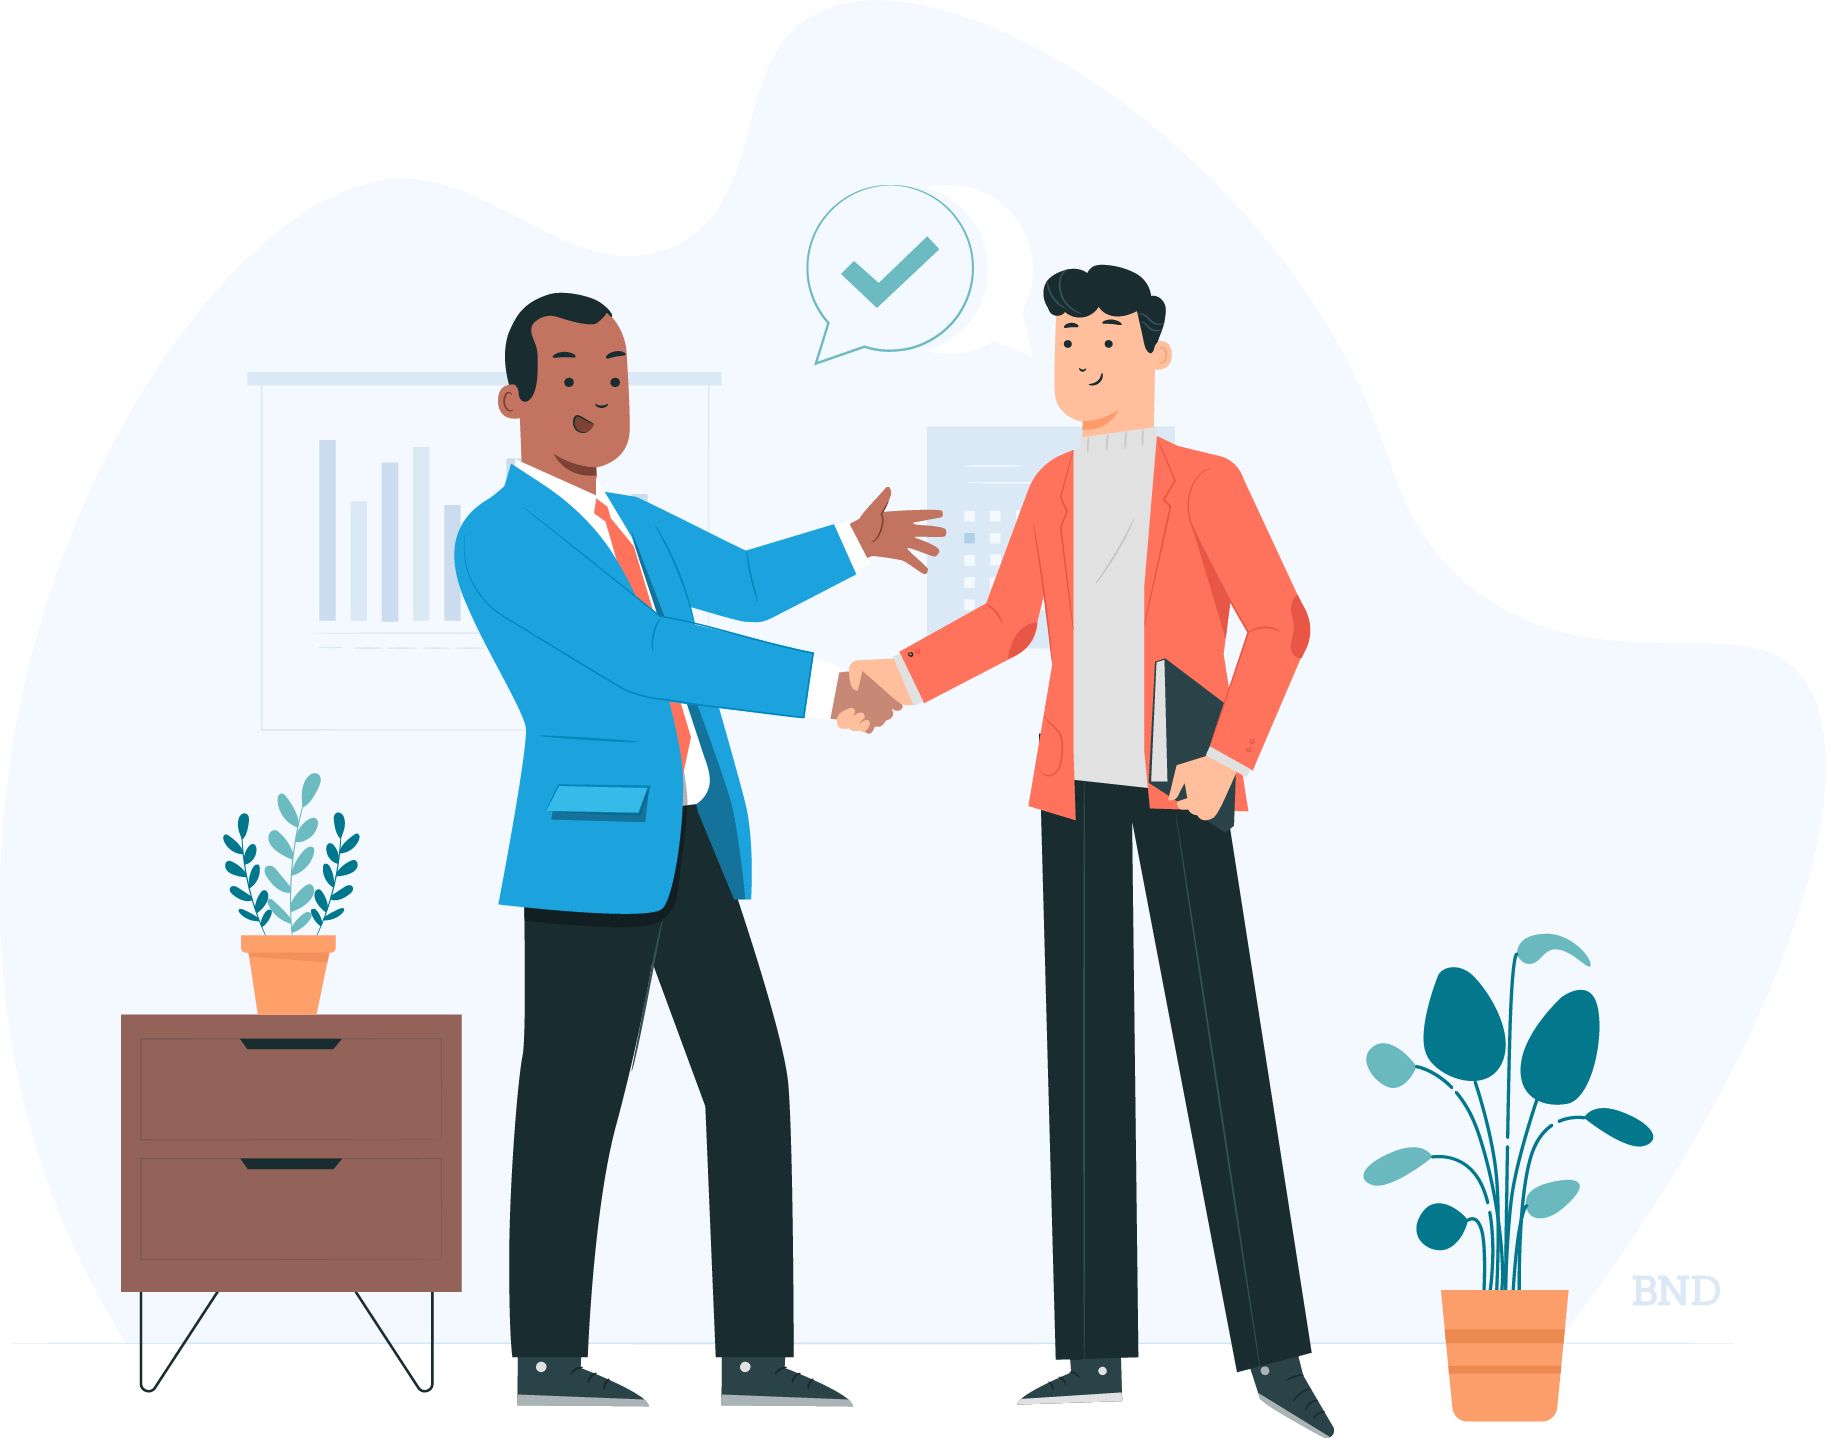 Graphic of two businesspeople shaking hands